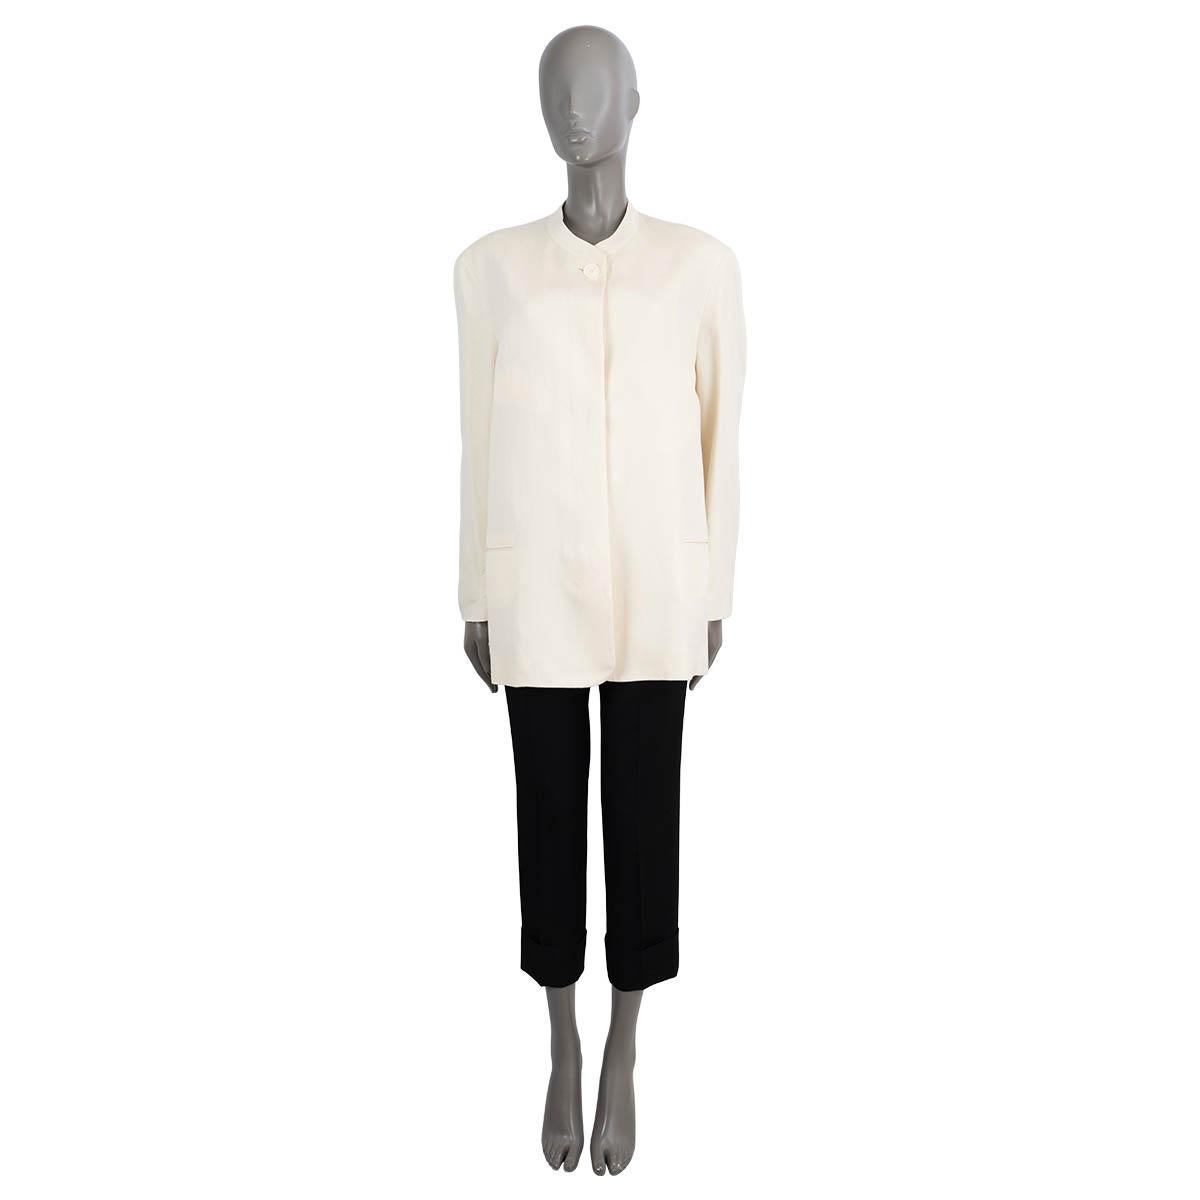 100% authentic The Row Aradia oversized jacket in ivory silk (64%) and linen (36%). Features a straight cut, band collar, two welt pockets and a single exposed button at the neck. Closes with concealed buttons down the front and is lined in cotton